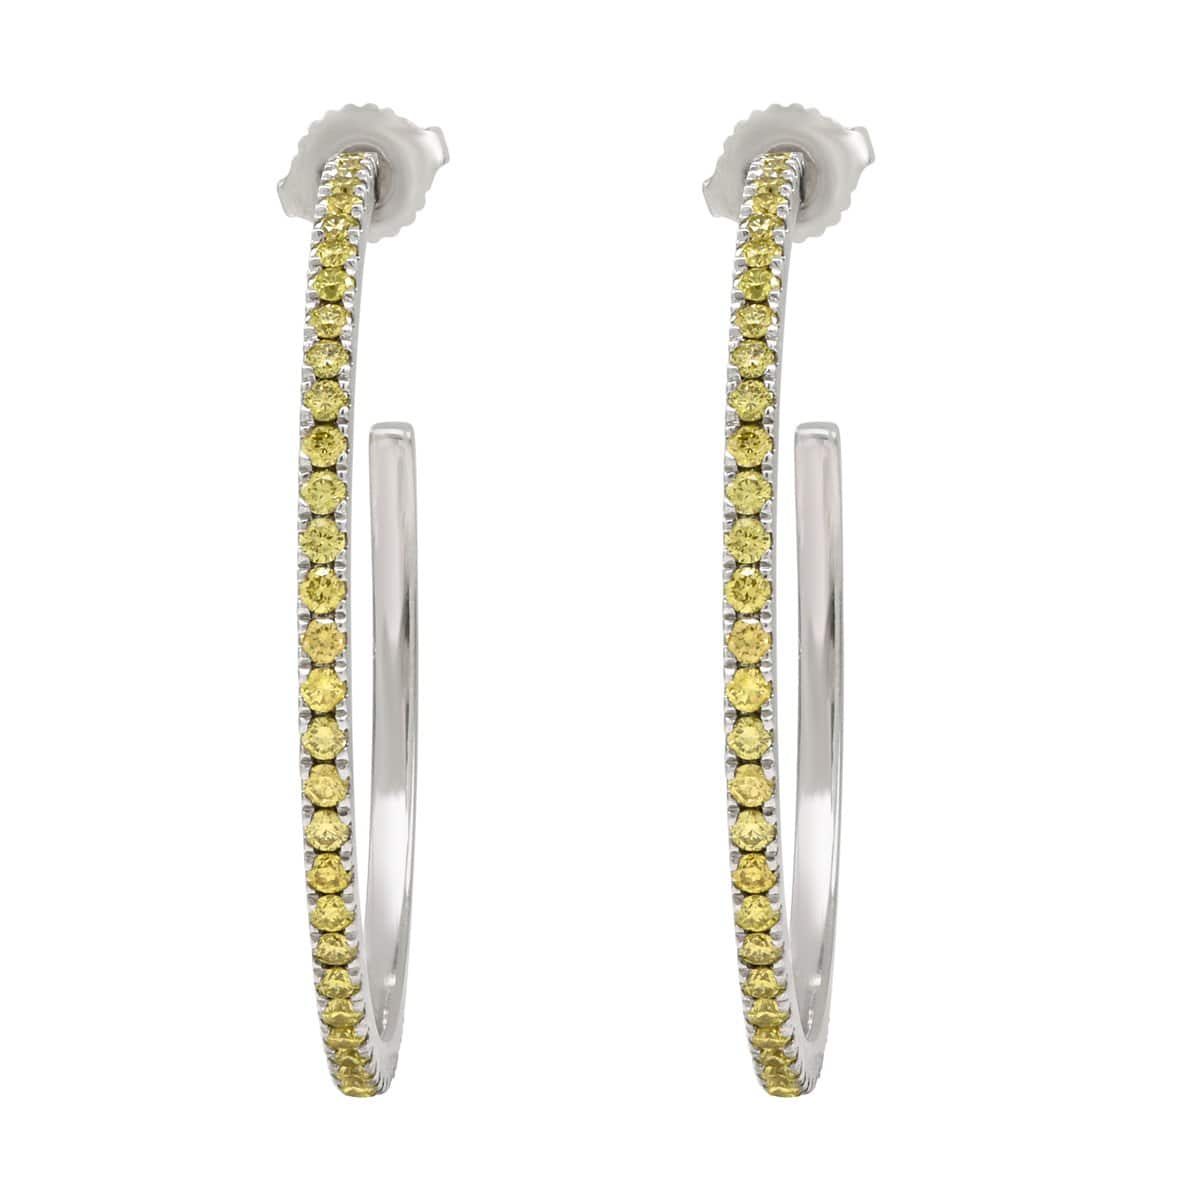 The AX-Party Hoops | Yellow Diamonds & White Gold Earrings